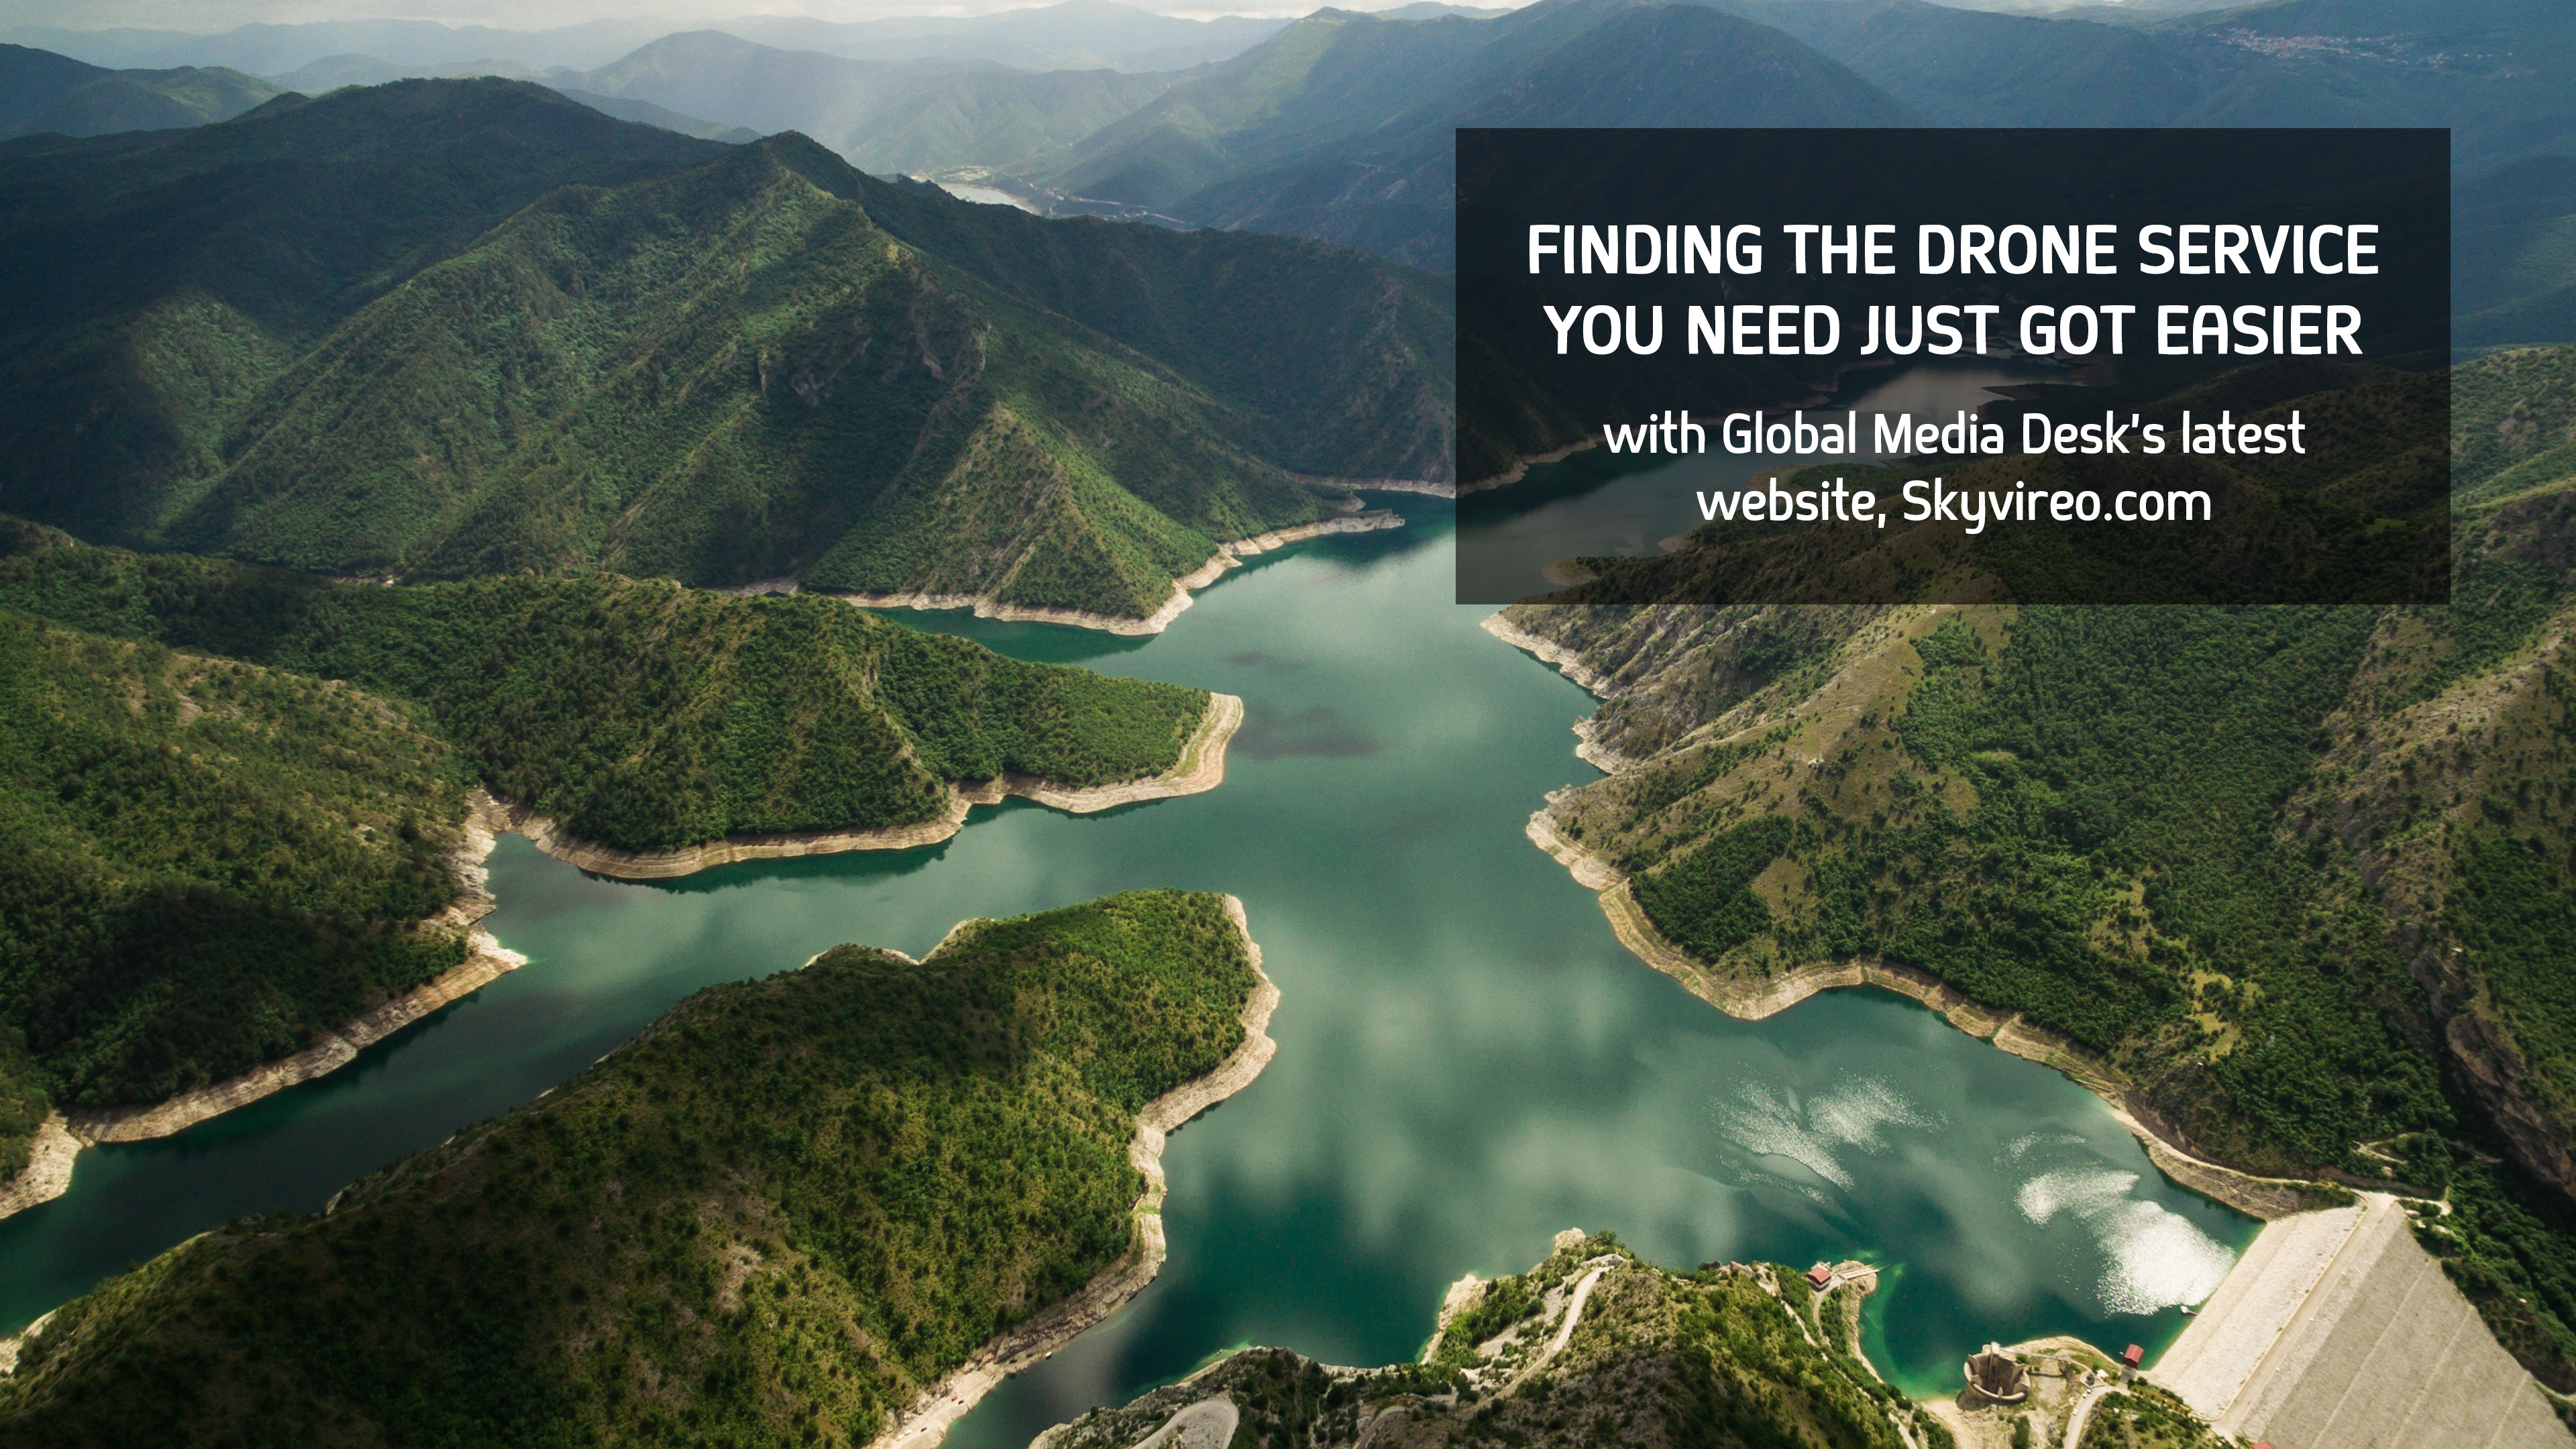 Finding the Drone Service You Need Just Got Easier With Global Media Desk’s Latest Website, Skyvireo.com